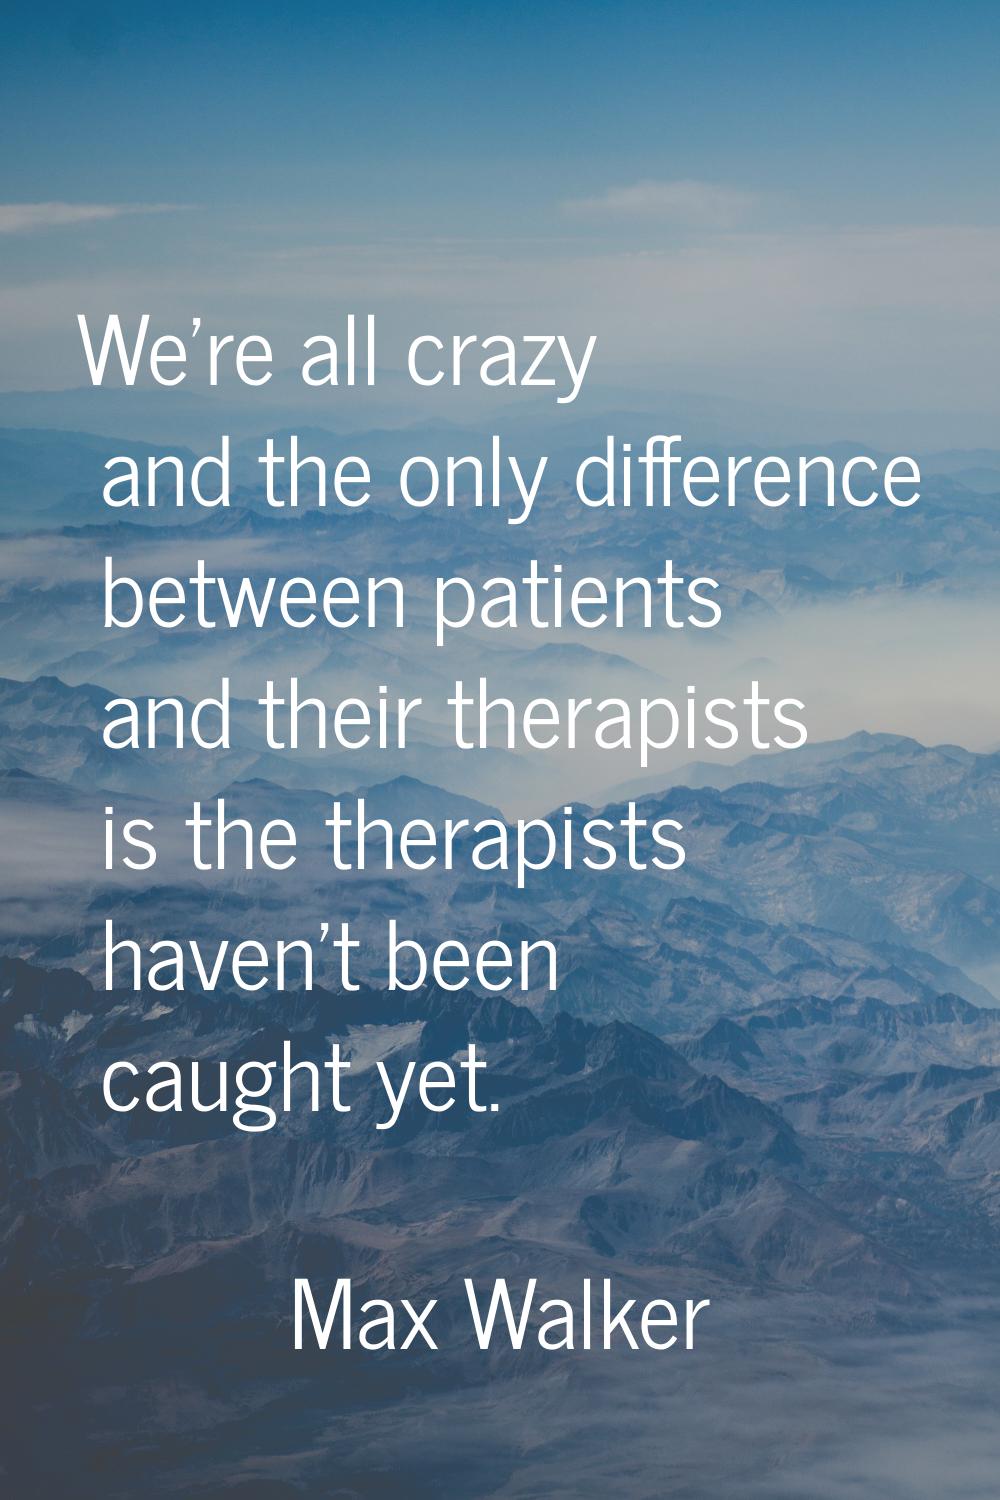 We're all crazy and the only difference between patients and their therapists is the therapists hav